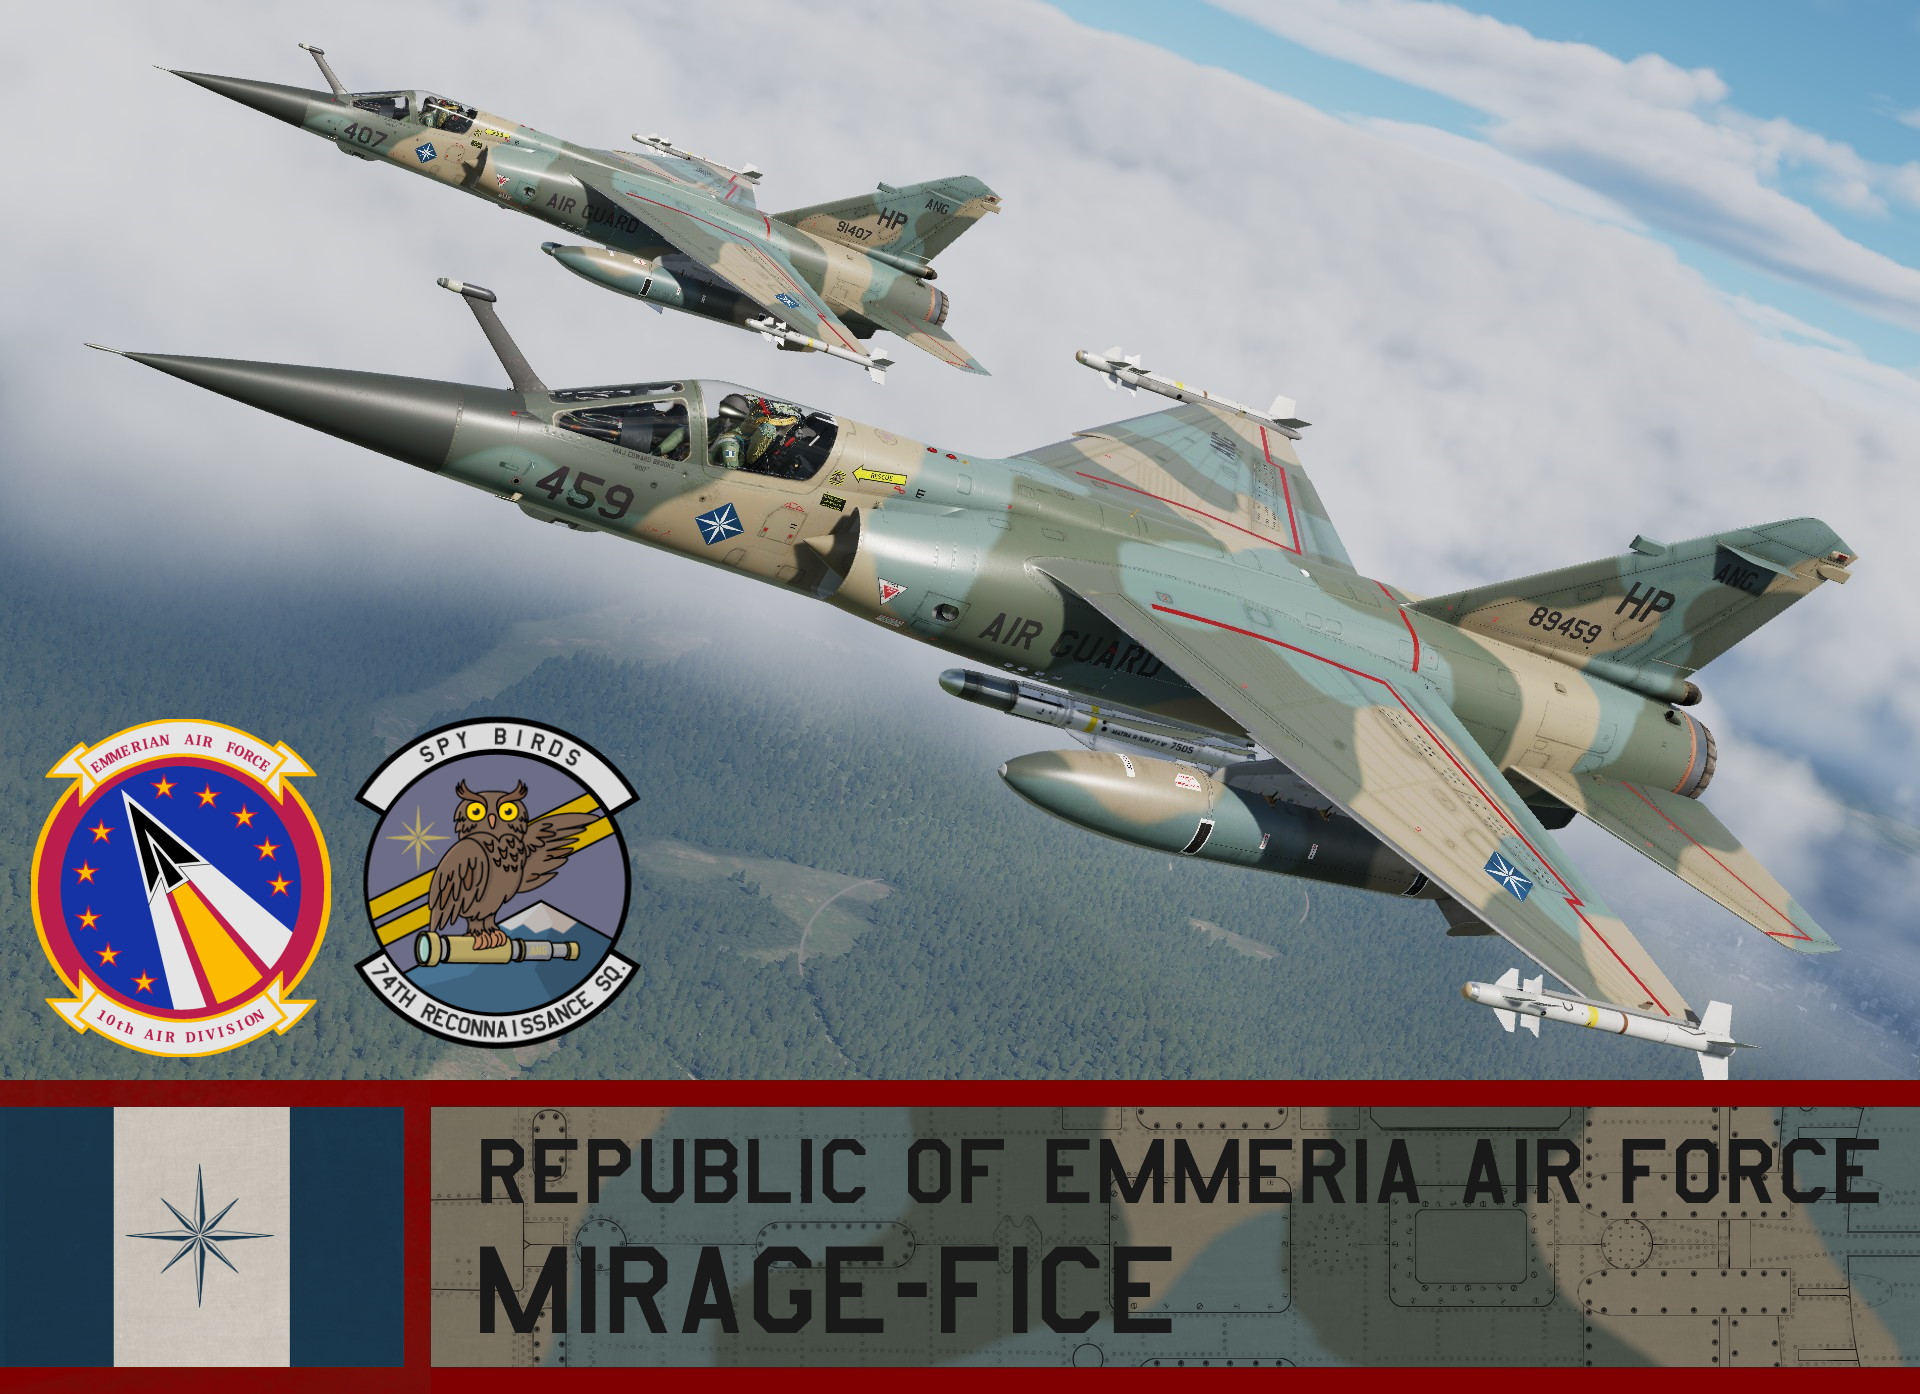 Republic of Emmeria Air Force, Air National Guard, Mirage-F1CR, Ace Combat 6, (10th Air Division, 74th Reconnaissance Squadron)